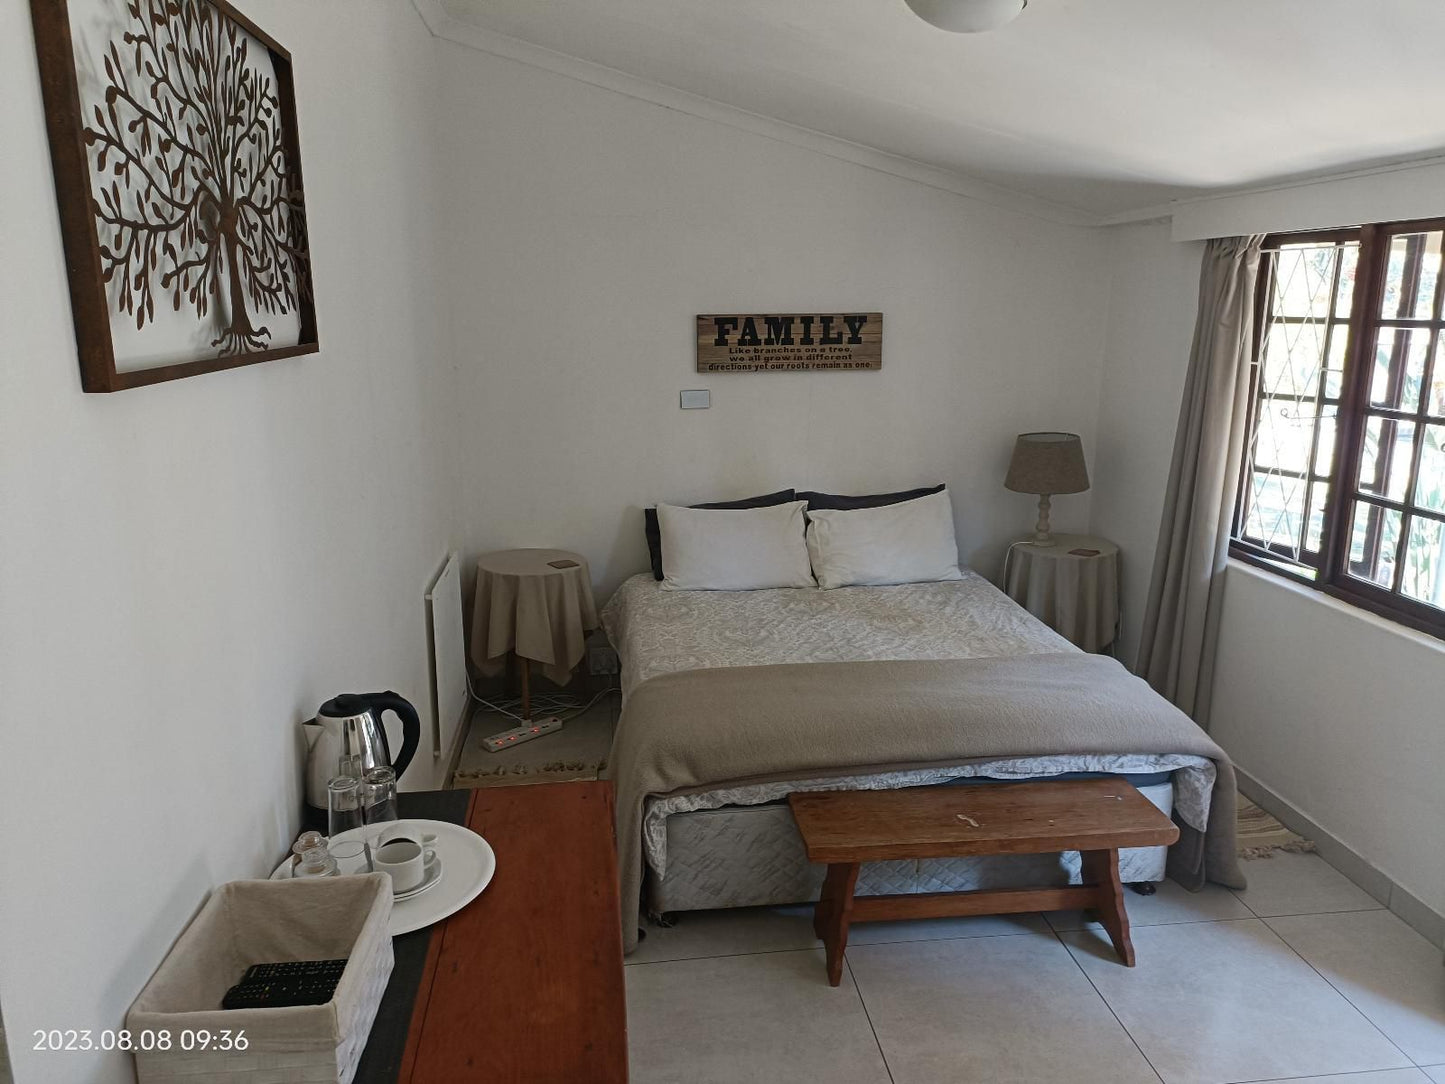 Sunbird Guest House Howick Kwazulu Natal South Africa Unsaturated, Bedroom